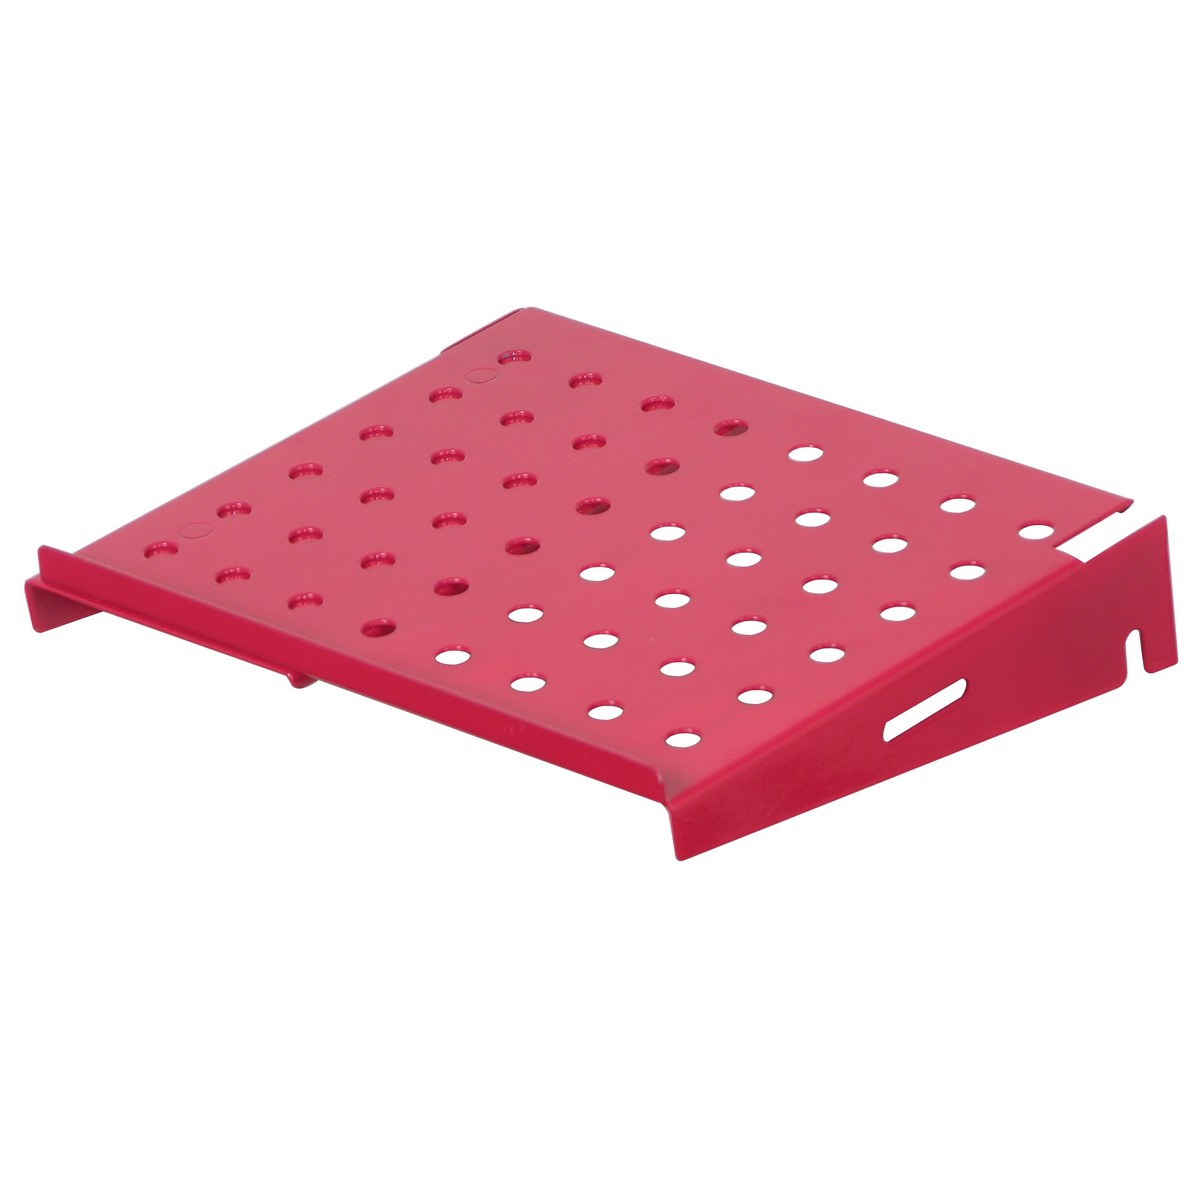 Odyssey Cases LSTANDTRAYRED | L Stand Tray Red